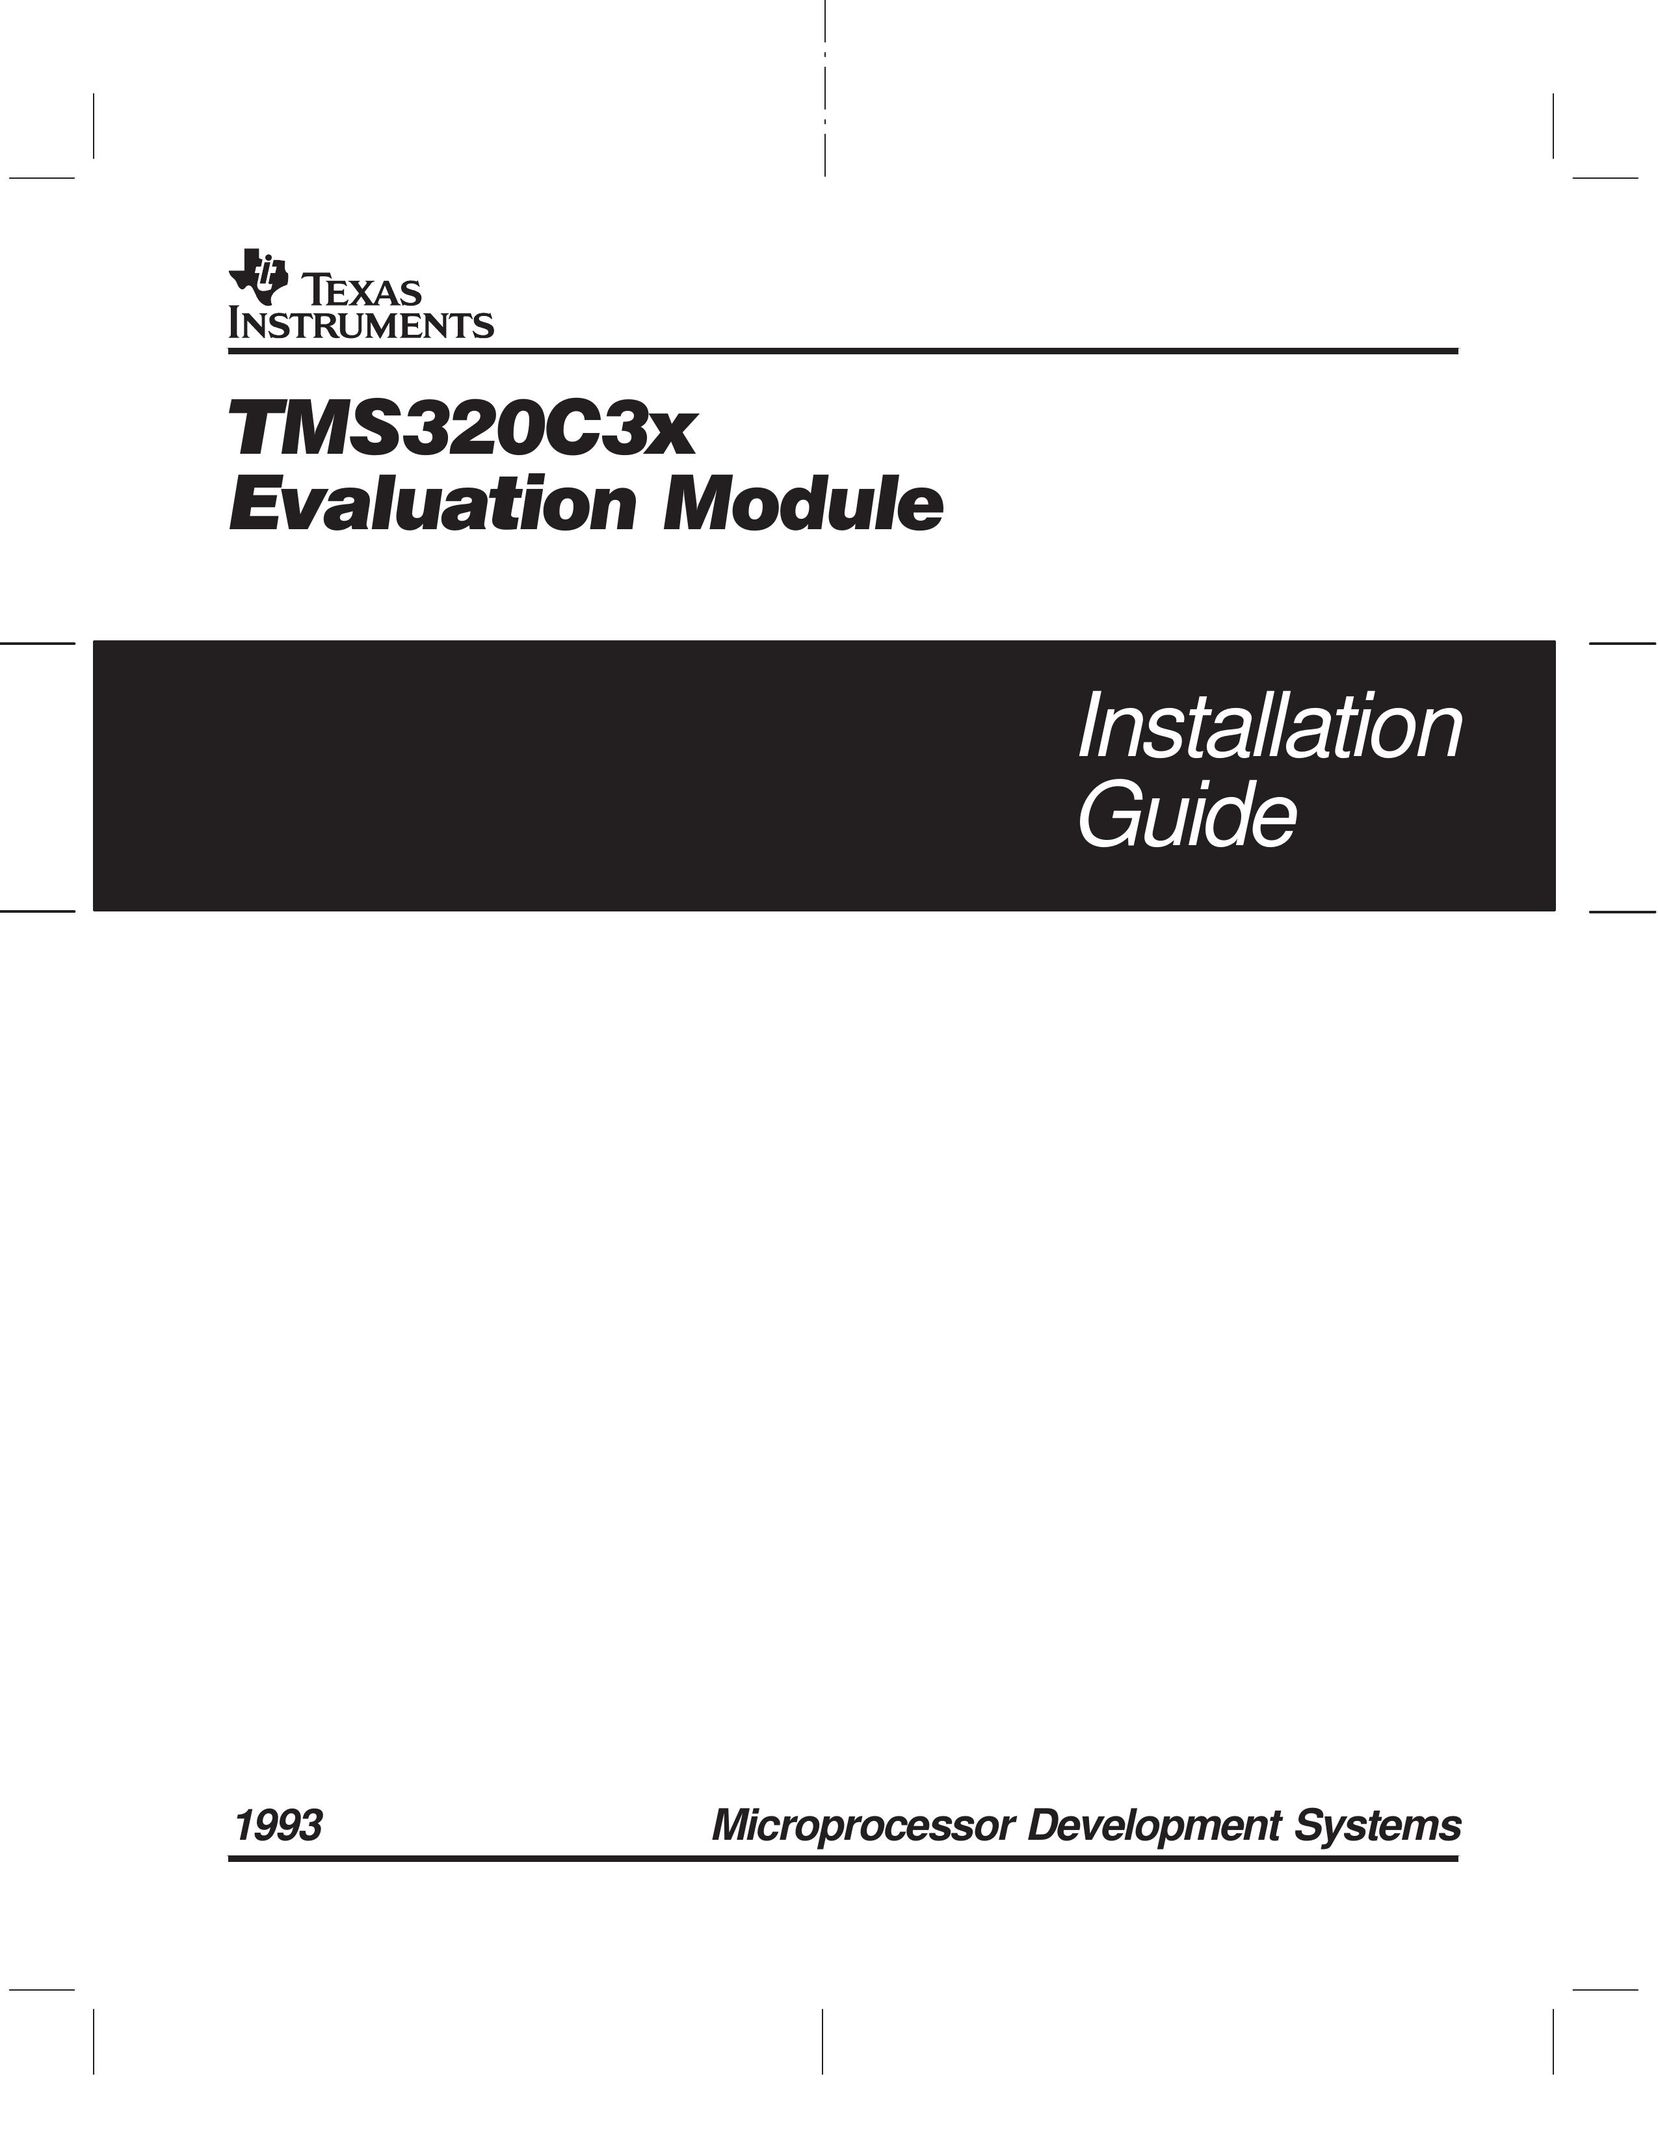 Texas Instruments TMS320C3x Network Card User Manual